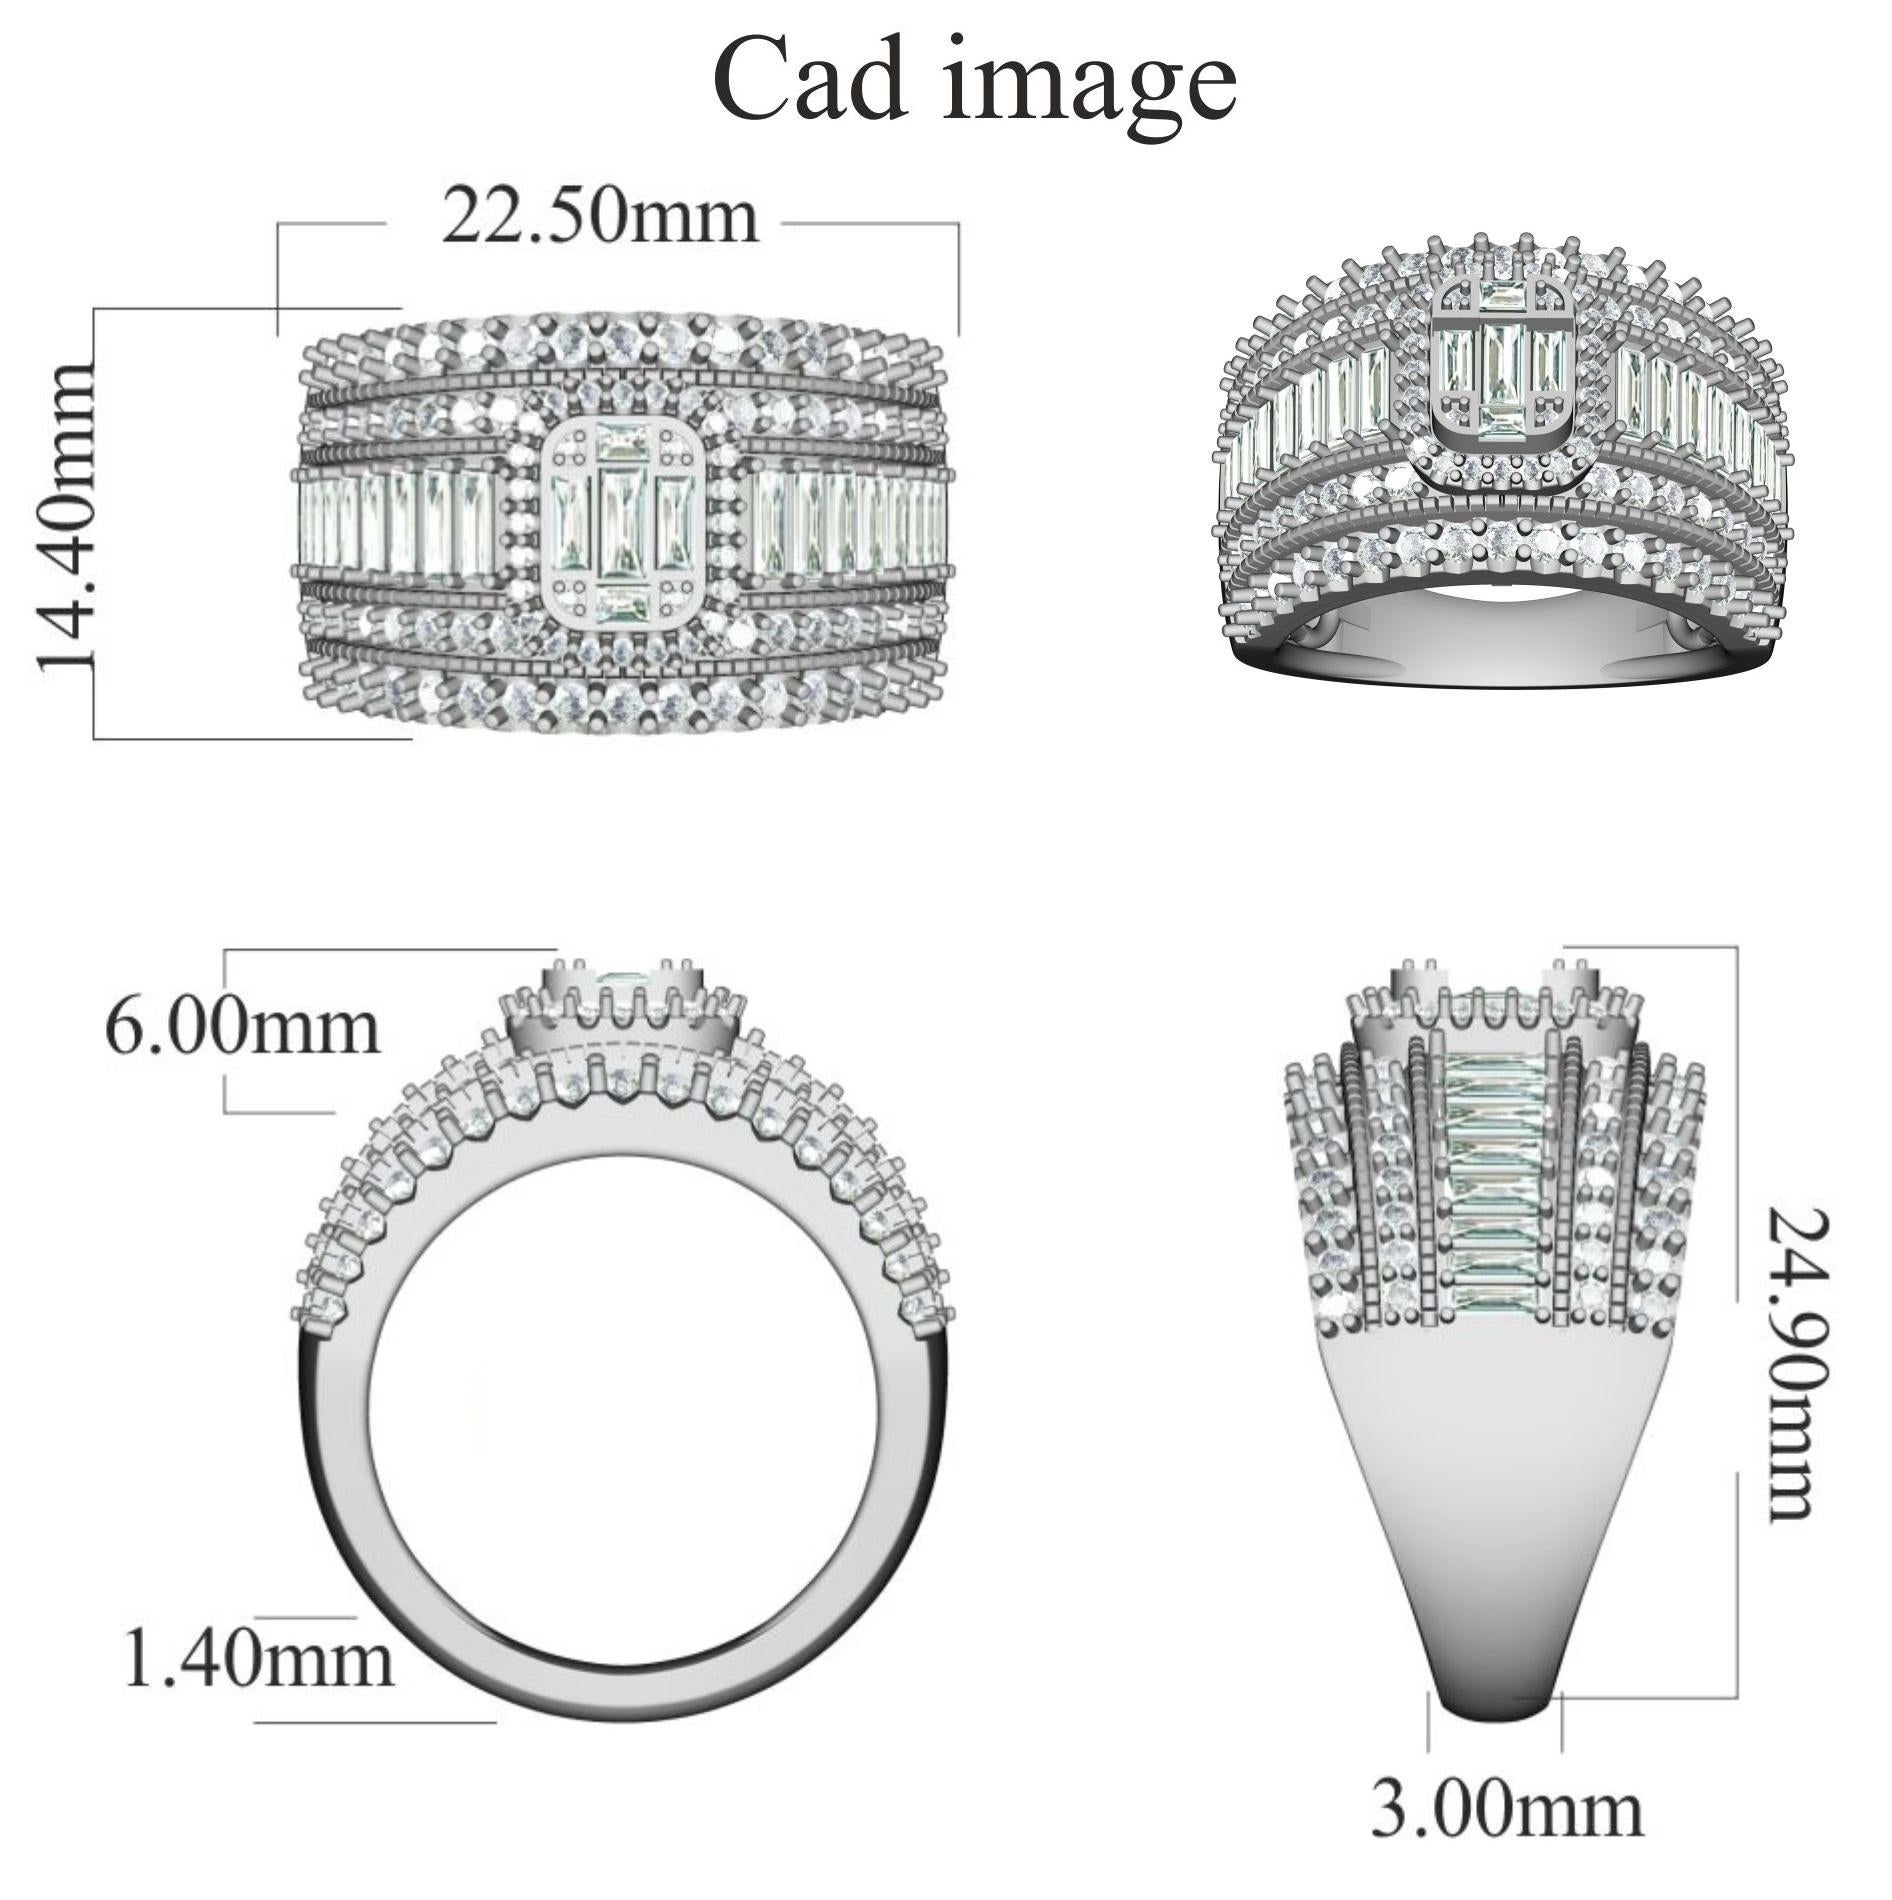 Why blend in when you can stand out with this beautiful diamond studded wedding band. The ring is crafted from 14-karat white gold and features 94 Round and 21 Baguette cut white diamonds, sets in Prong, Pave & Channel setting, H-I color I2 clarity